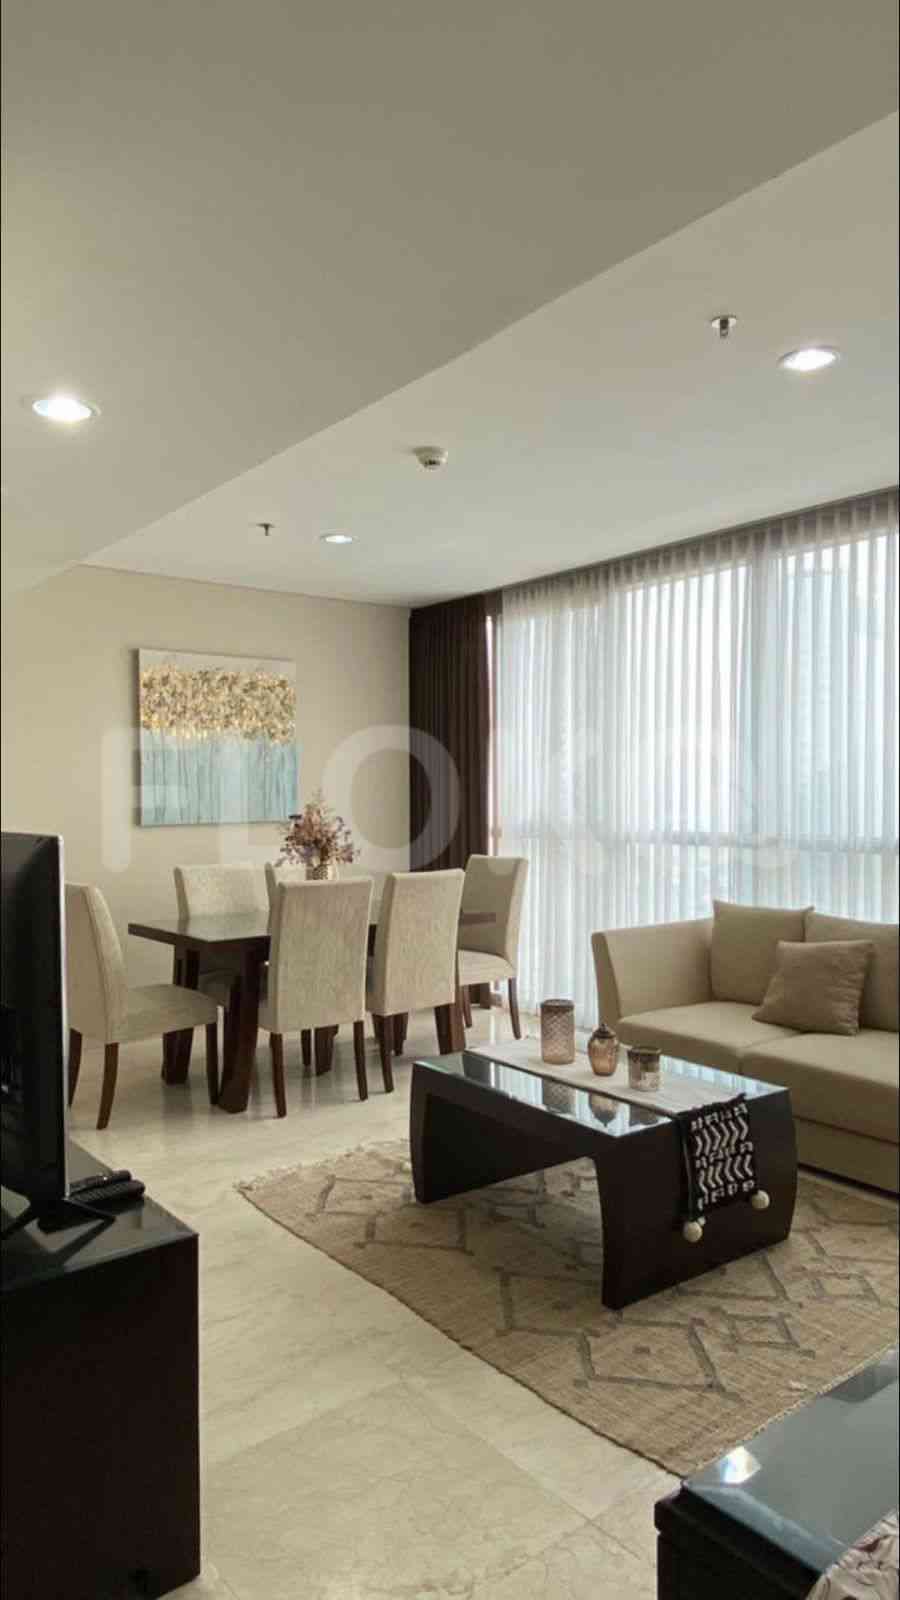 3 Bedroom on 24th Floor for Rent in Ciputra World 2 Apartment - fku000 5